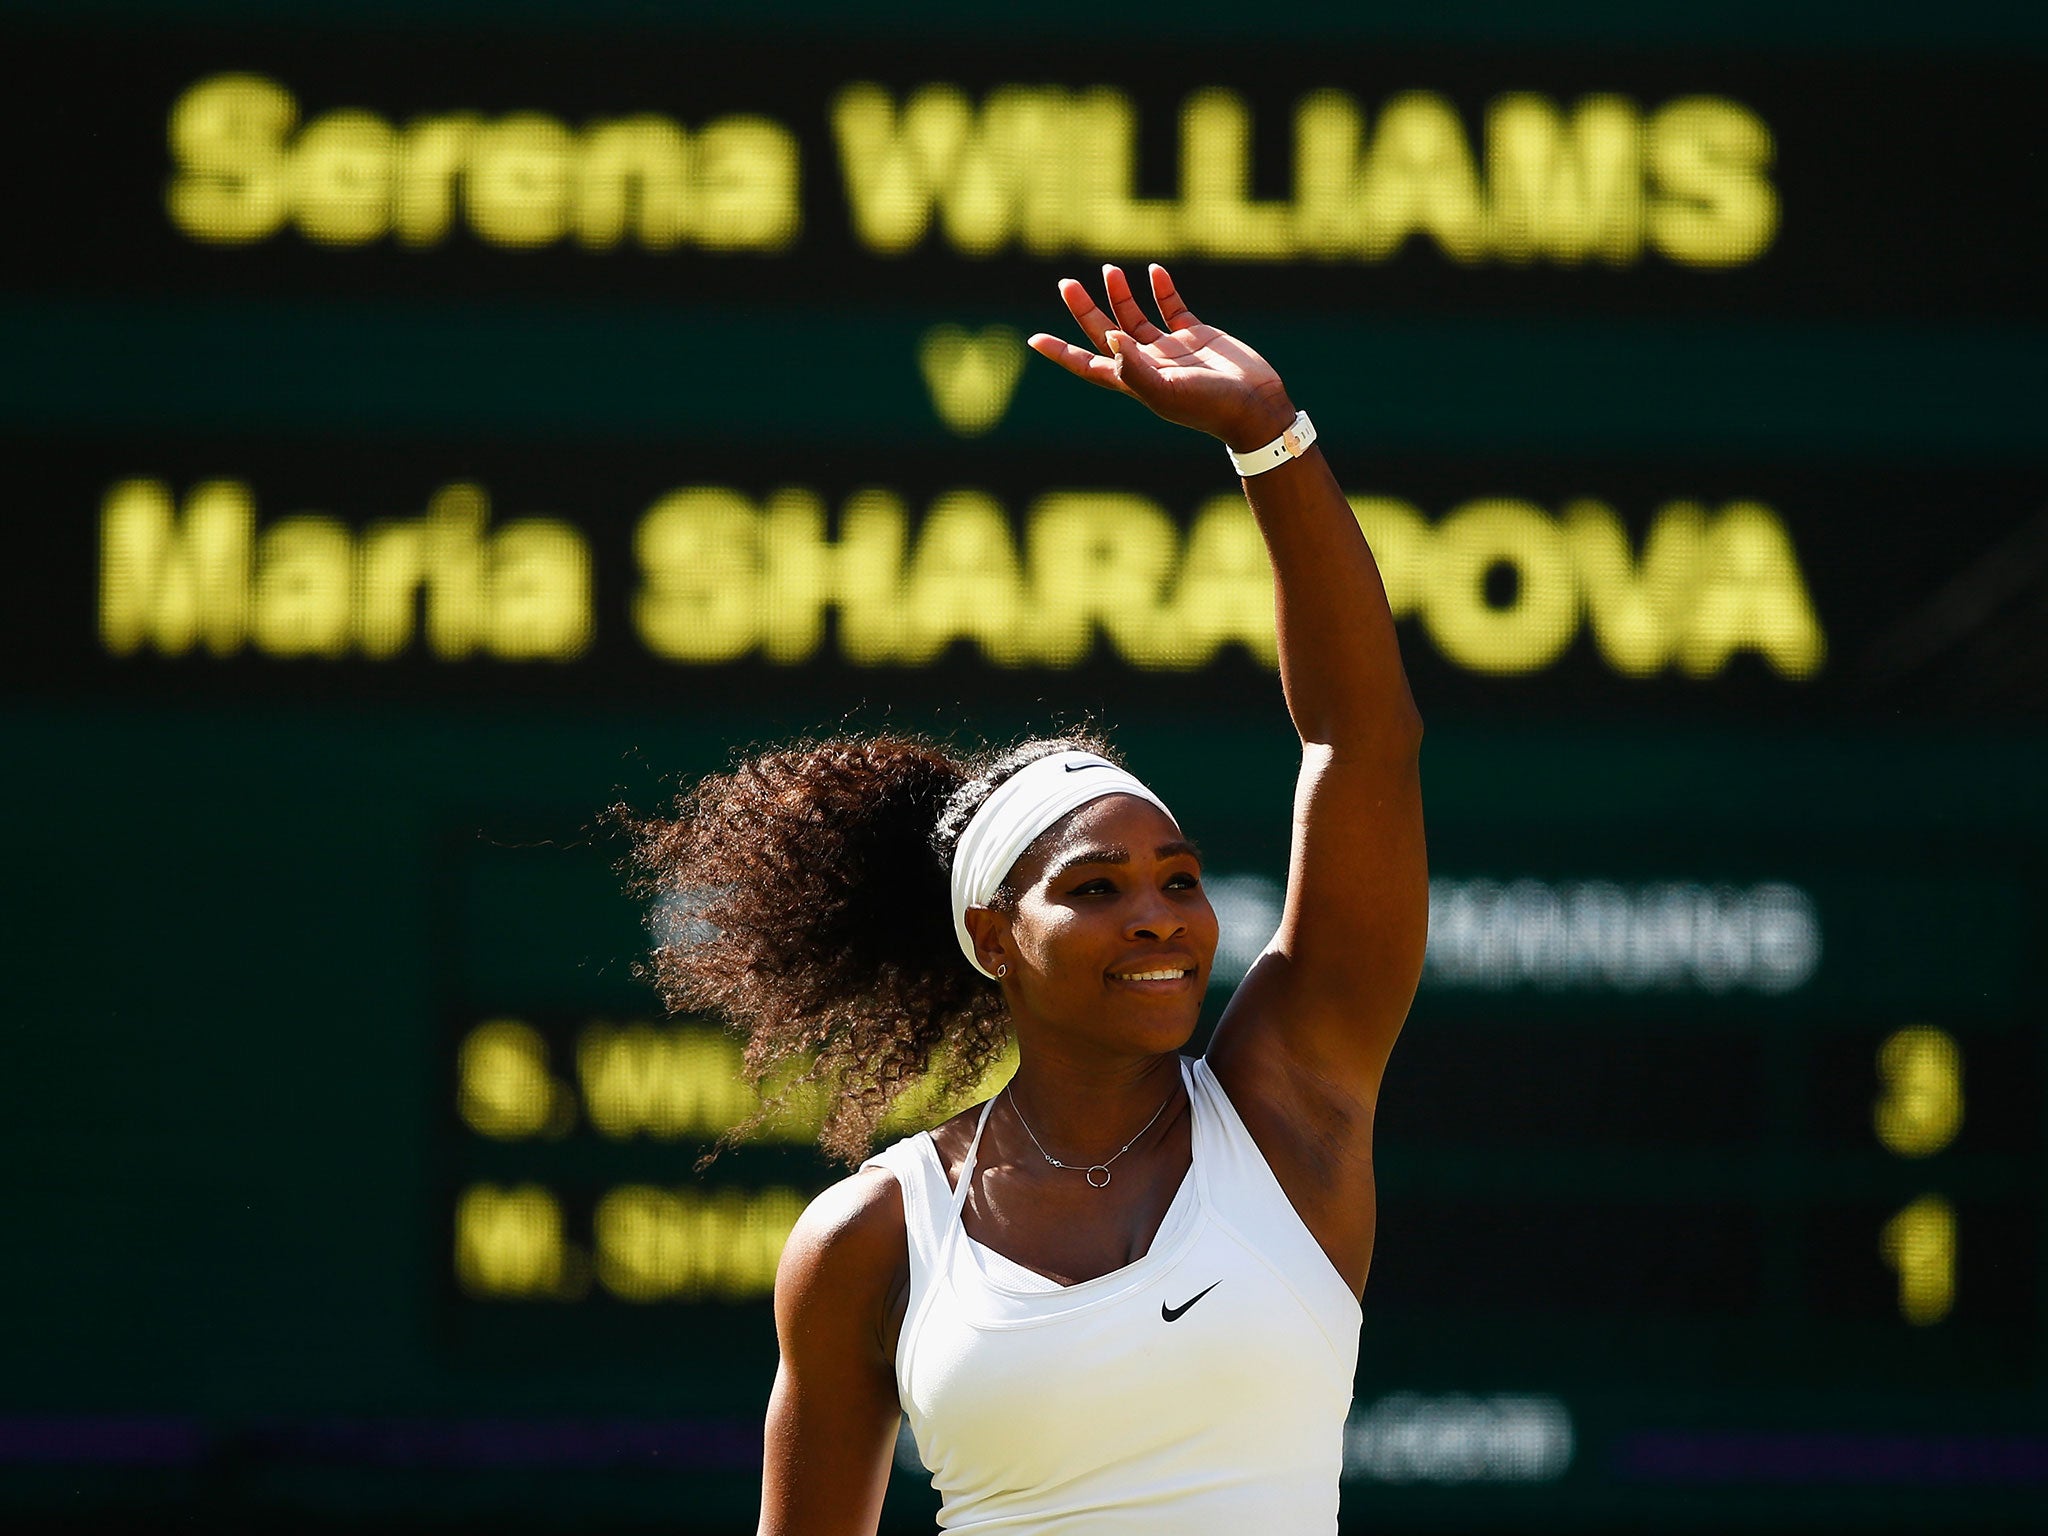 Serena Williams returns to tennis after year-long layoff with defeat  alongside her sister Venus, Tennis News